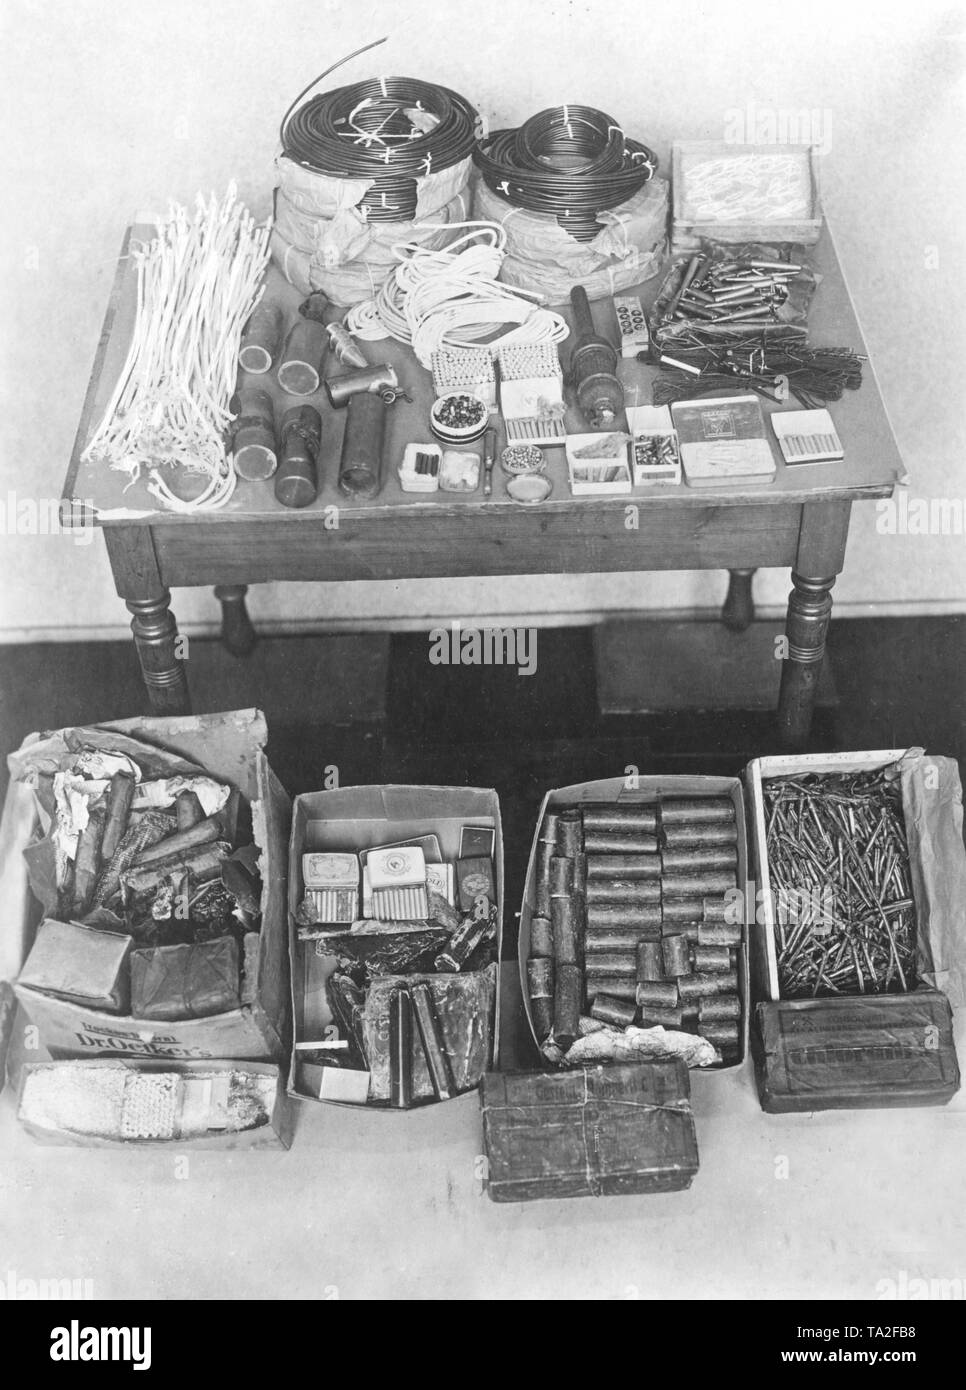 Explosive material was found at the KPD functionary Klaus Ueberbrueck in Berlin-Tempelhof. Here is a small selection of the seized materials (Undated photo). Stock Photo